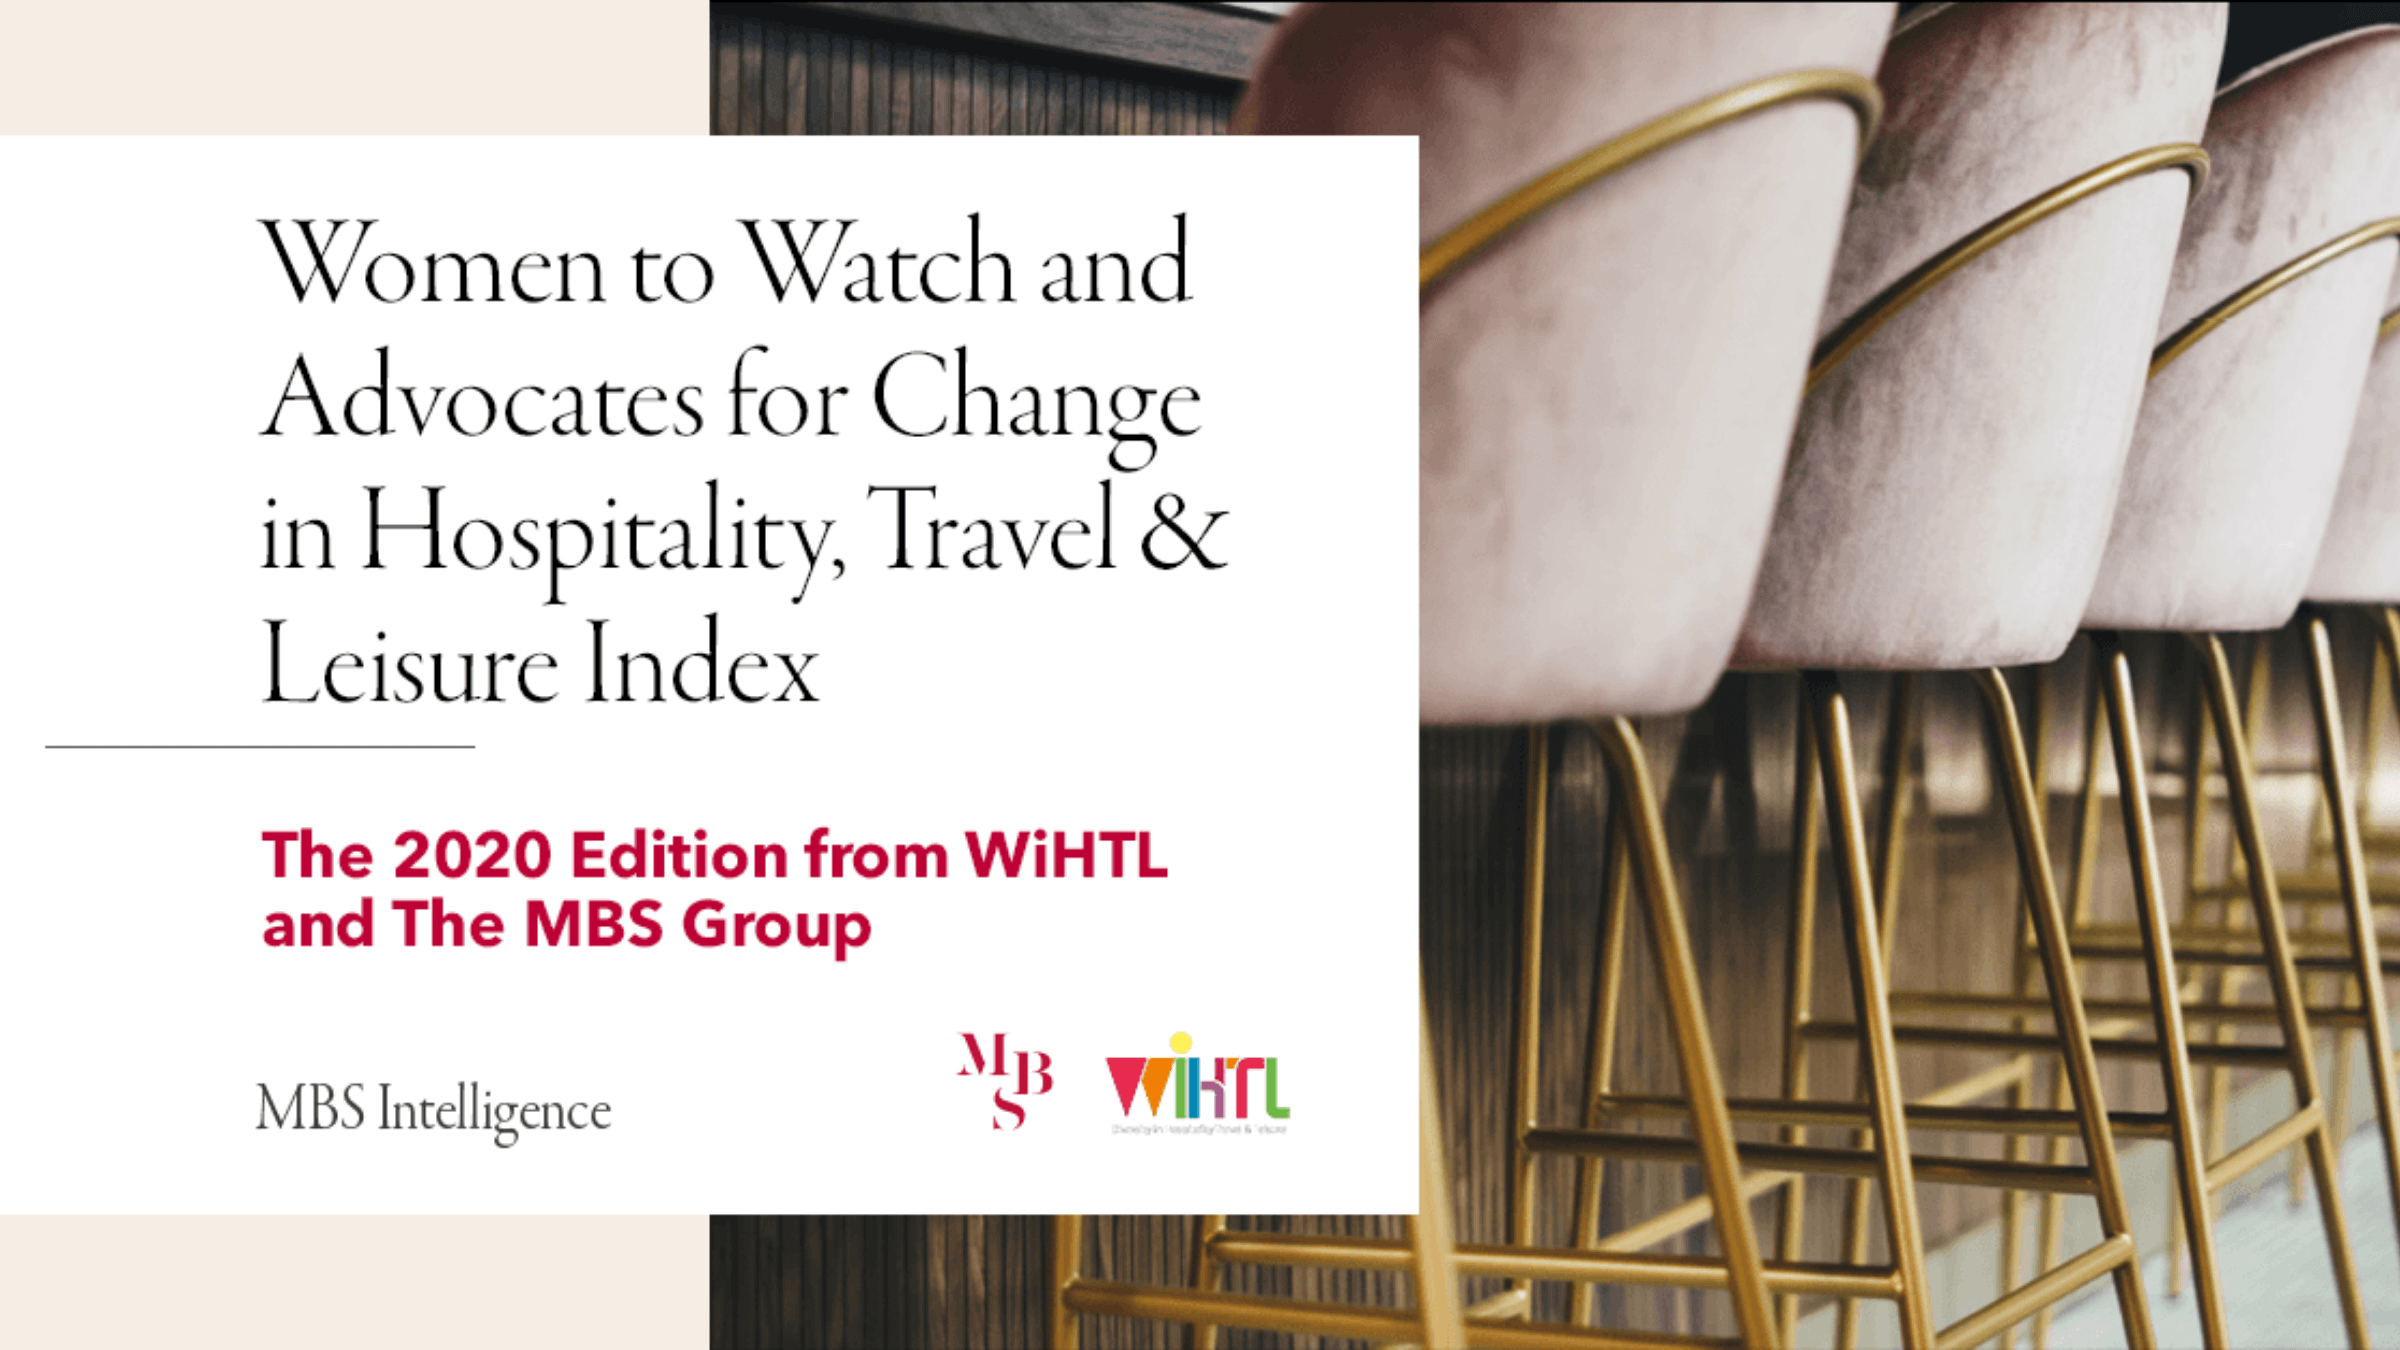 Women to Watch and Advocates for Change in Hospitality, Travel & Leisure Index 2020